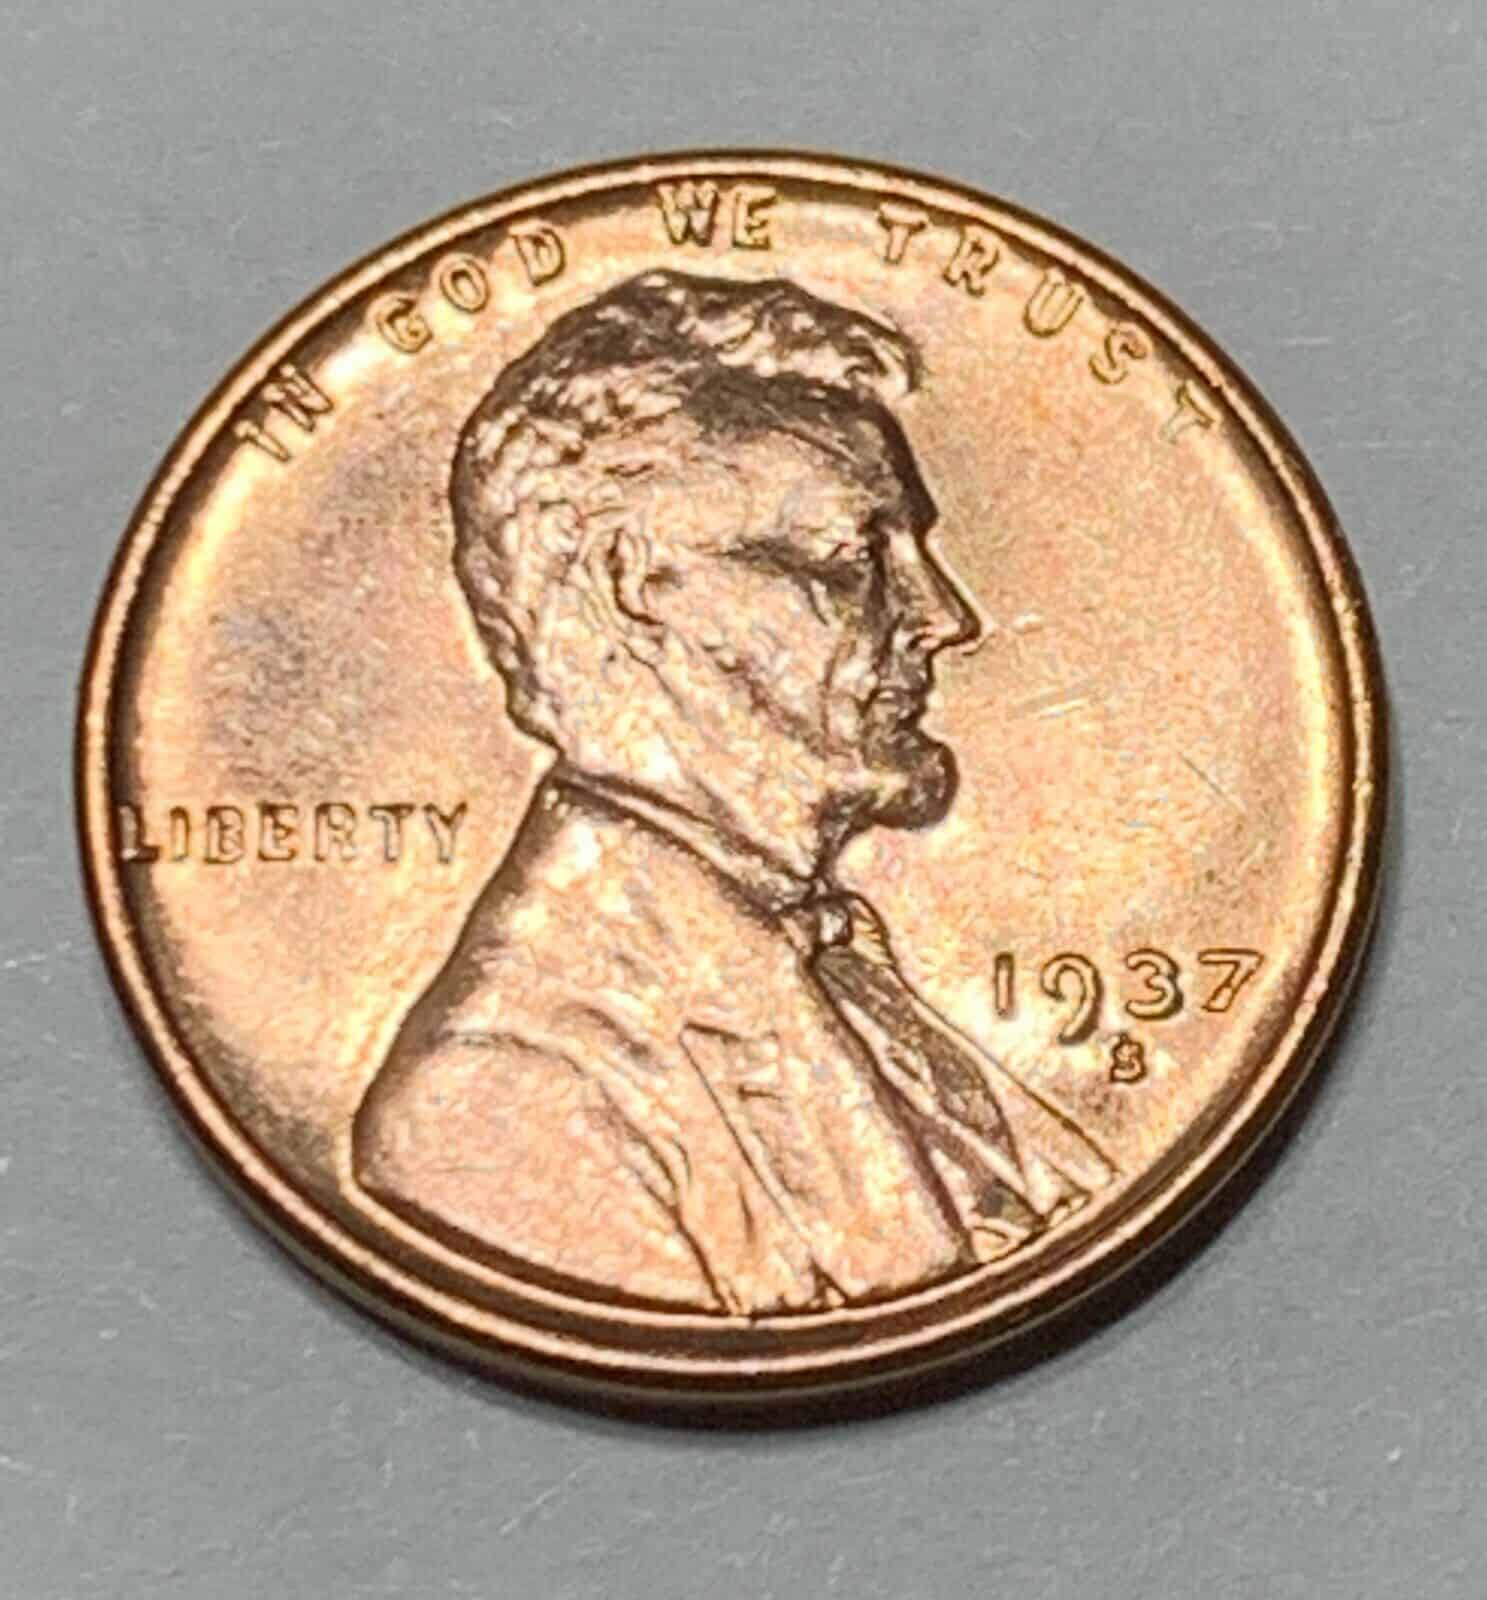 1937 Wheat Penny Value for “S” Mint Mark